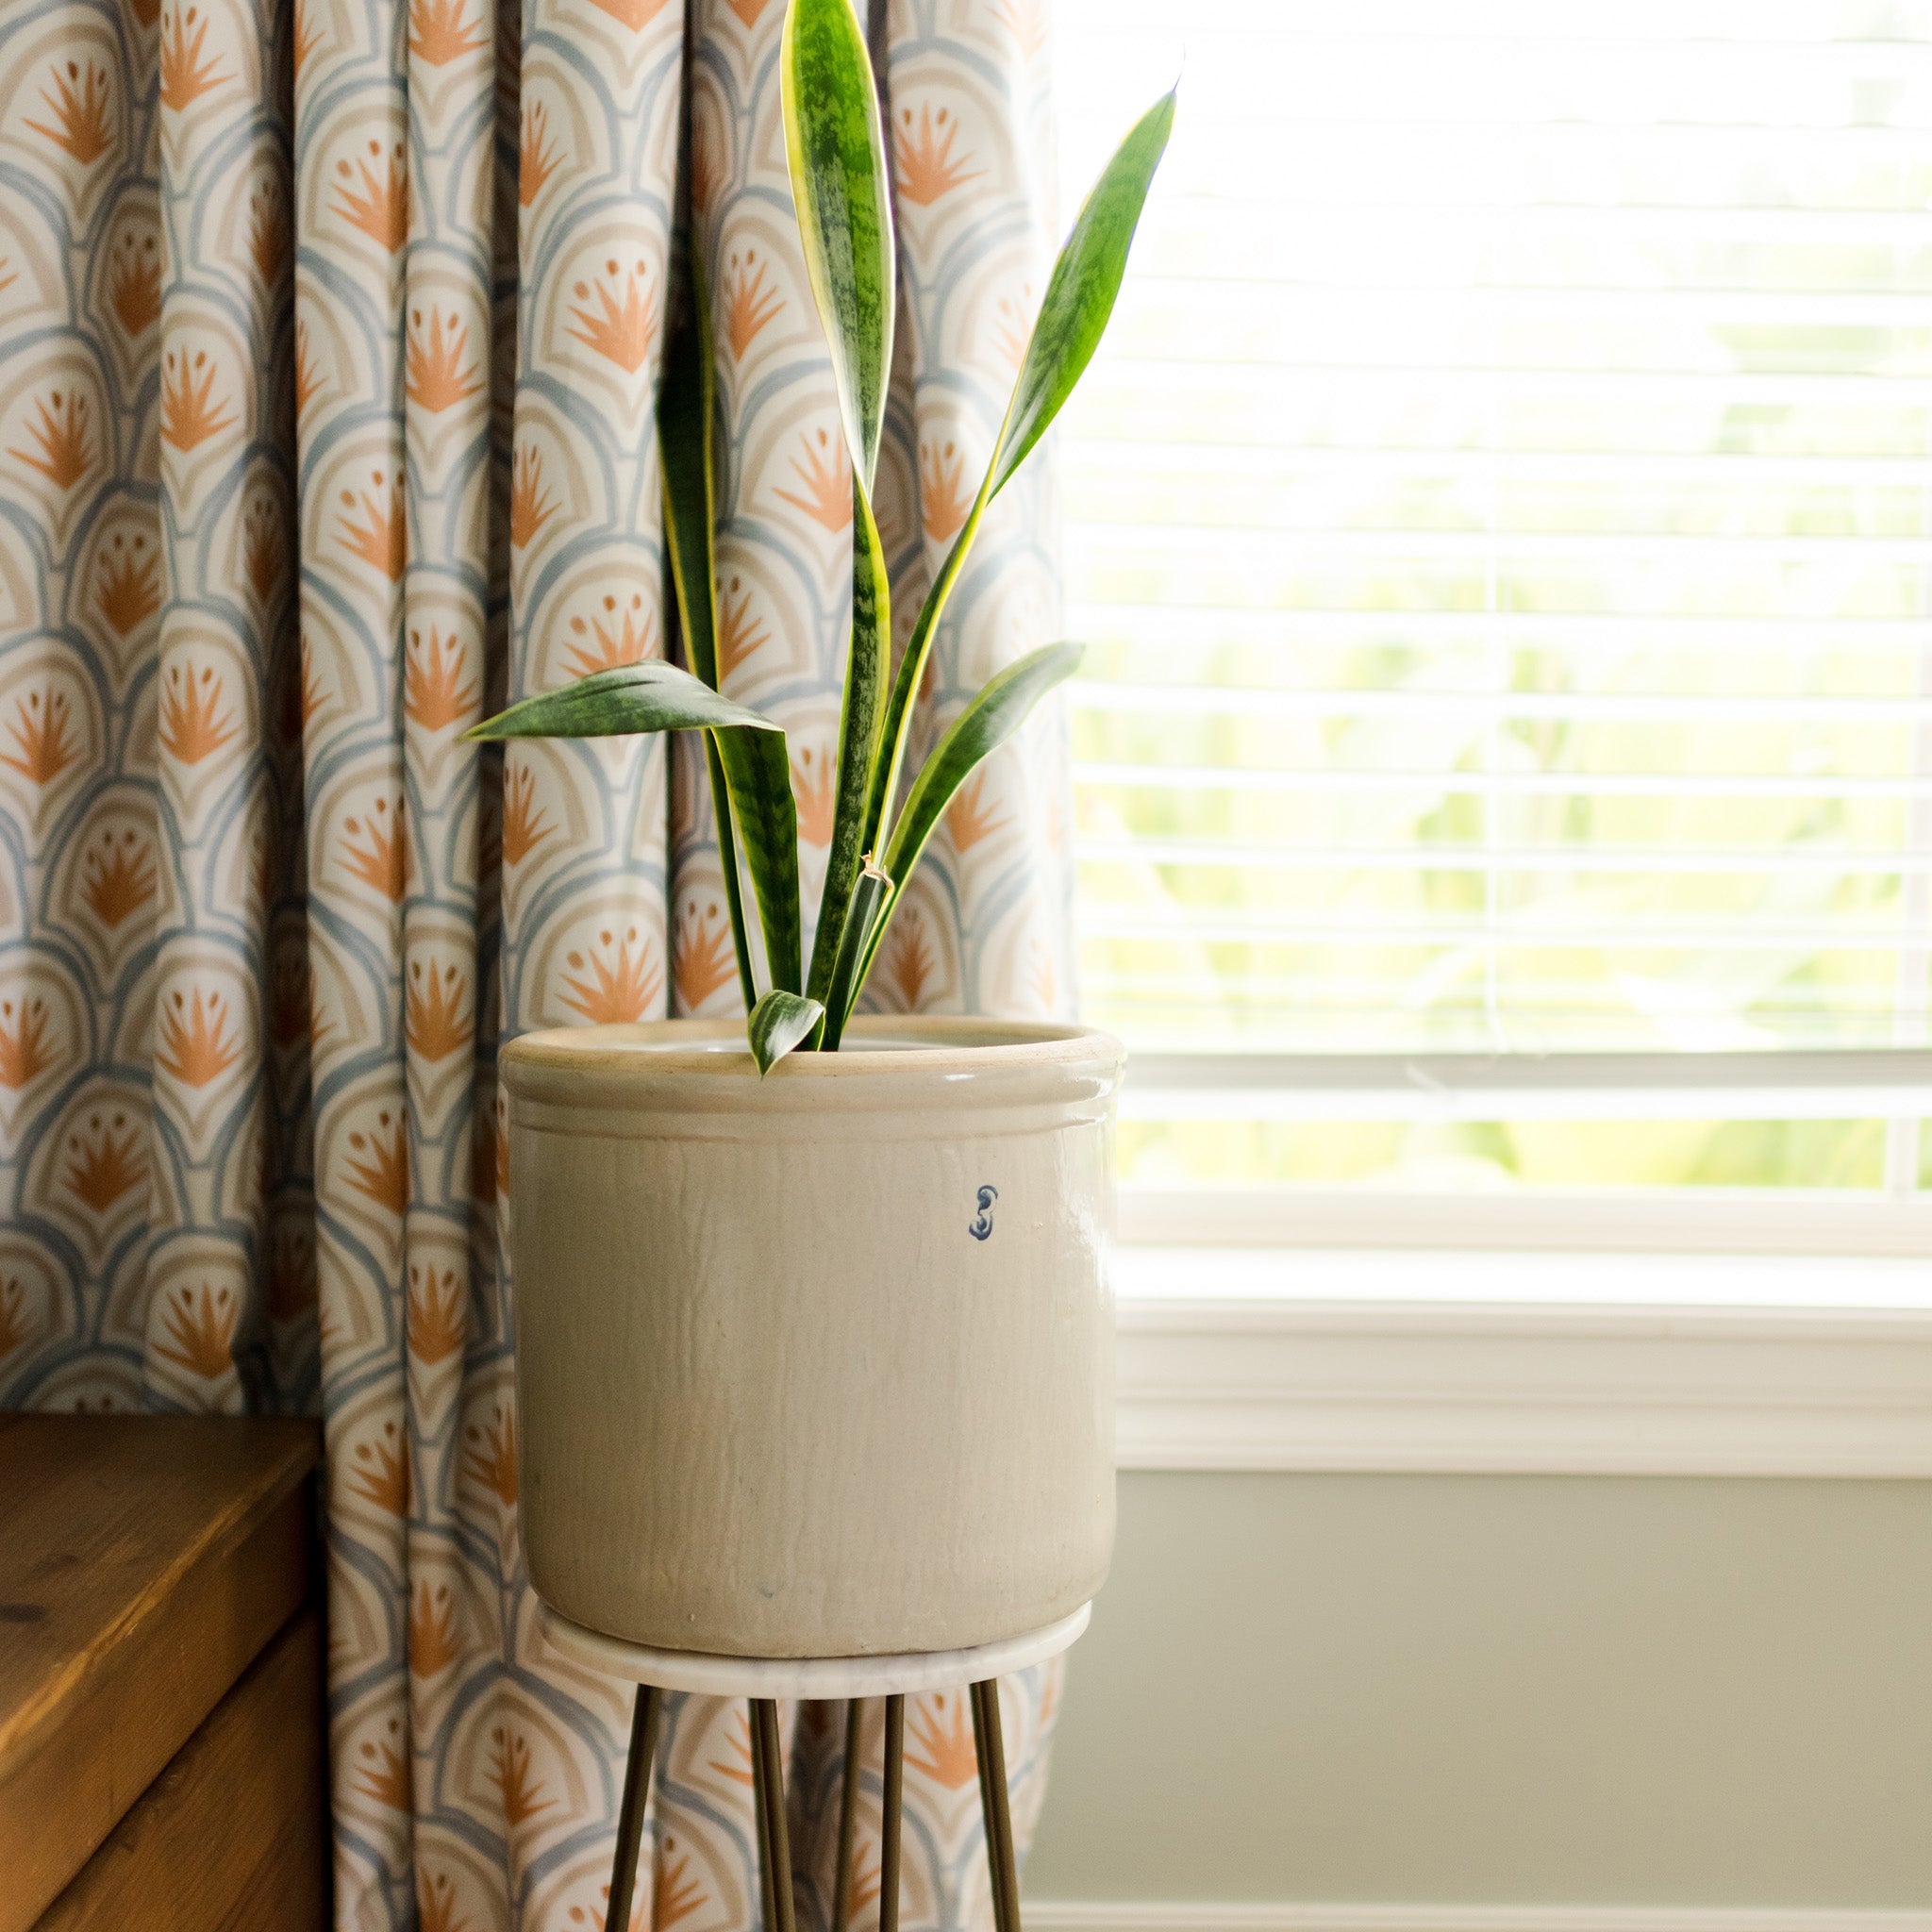 Window close-up styled with Art Deco Palm Pattern Printed Curtains and white Plant-pot in front